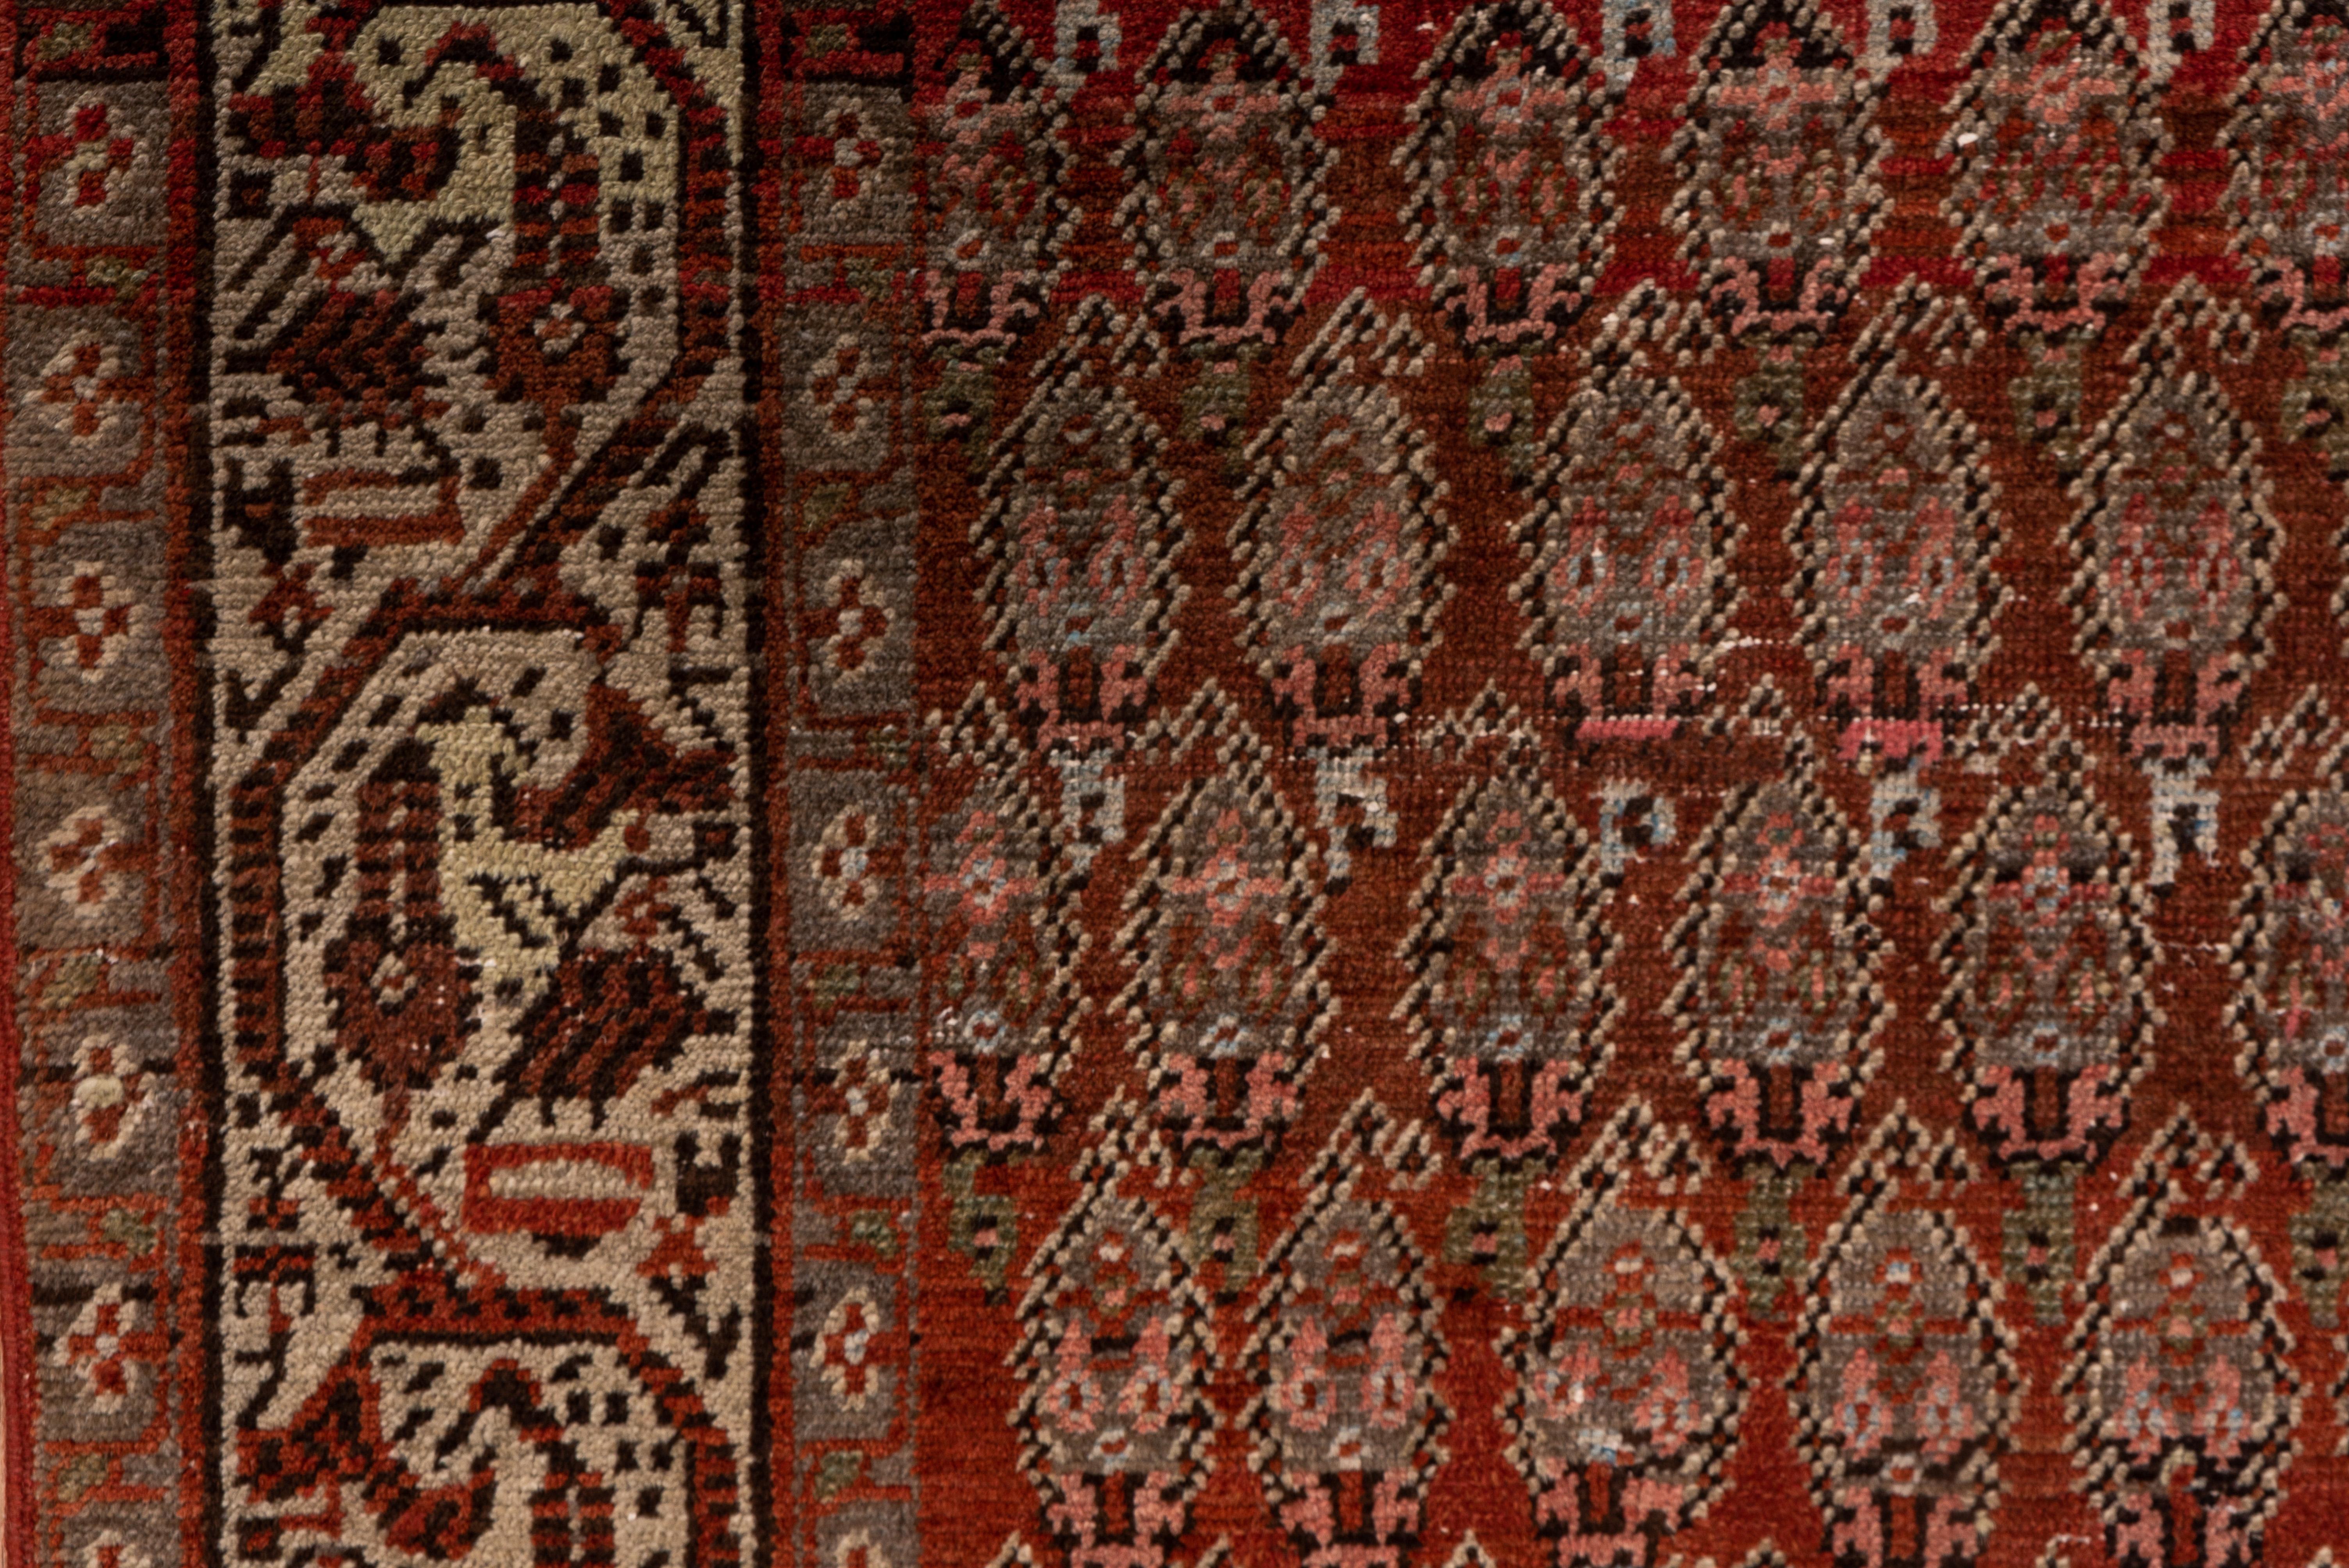 Wool Antique Persian Saraband Long Runner, Red Paisley Field, Taupe Borders For Sale